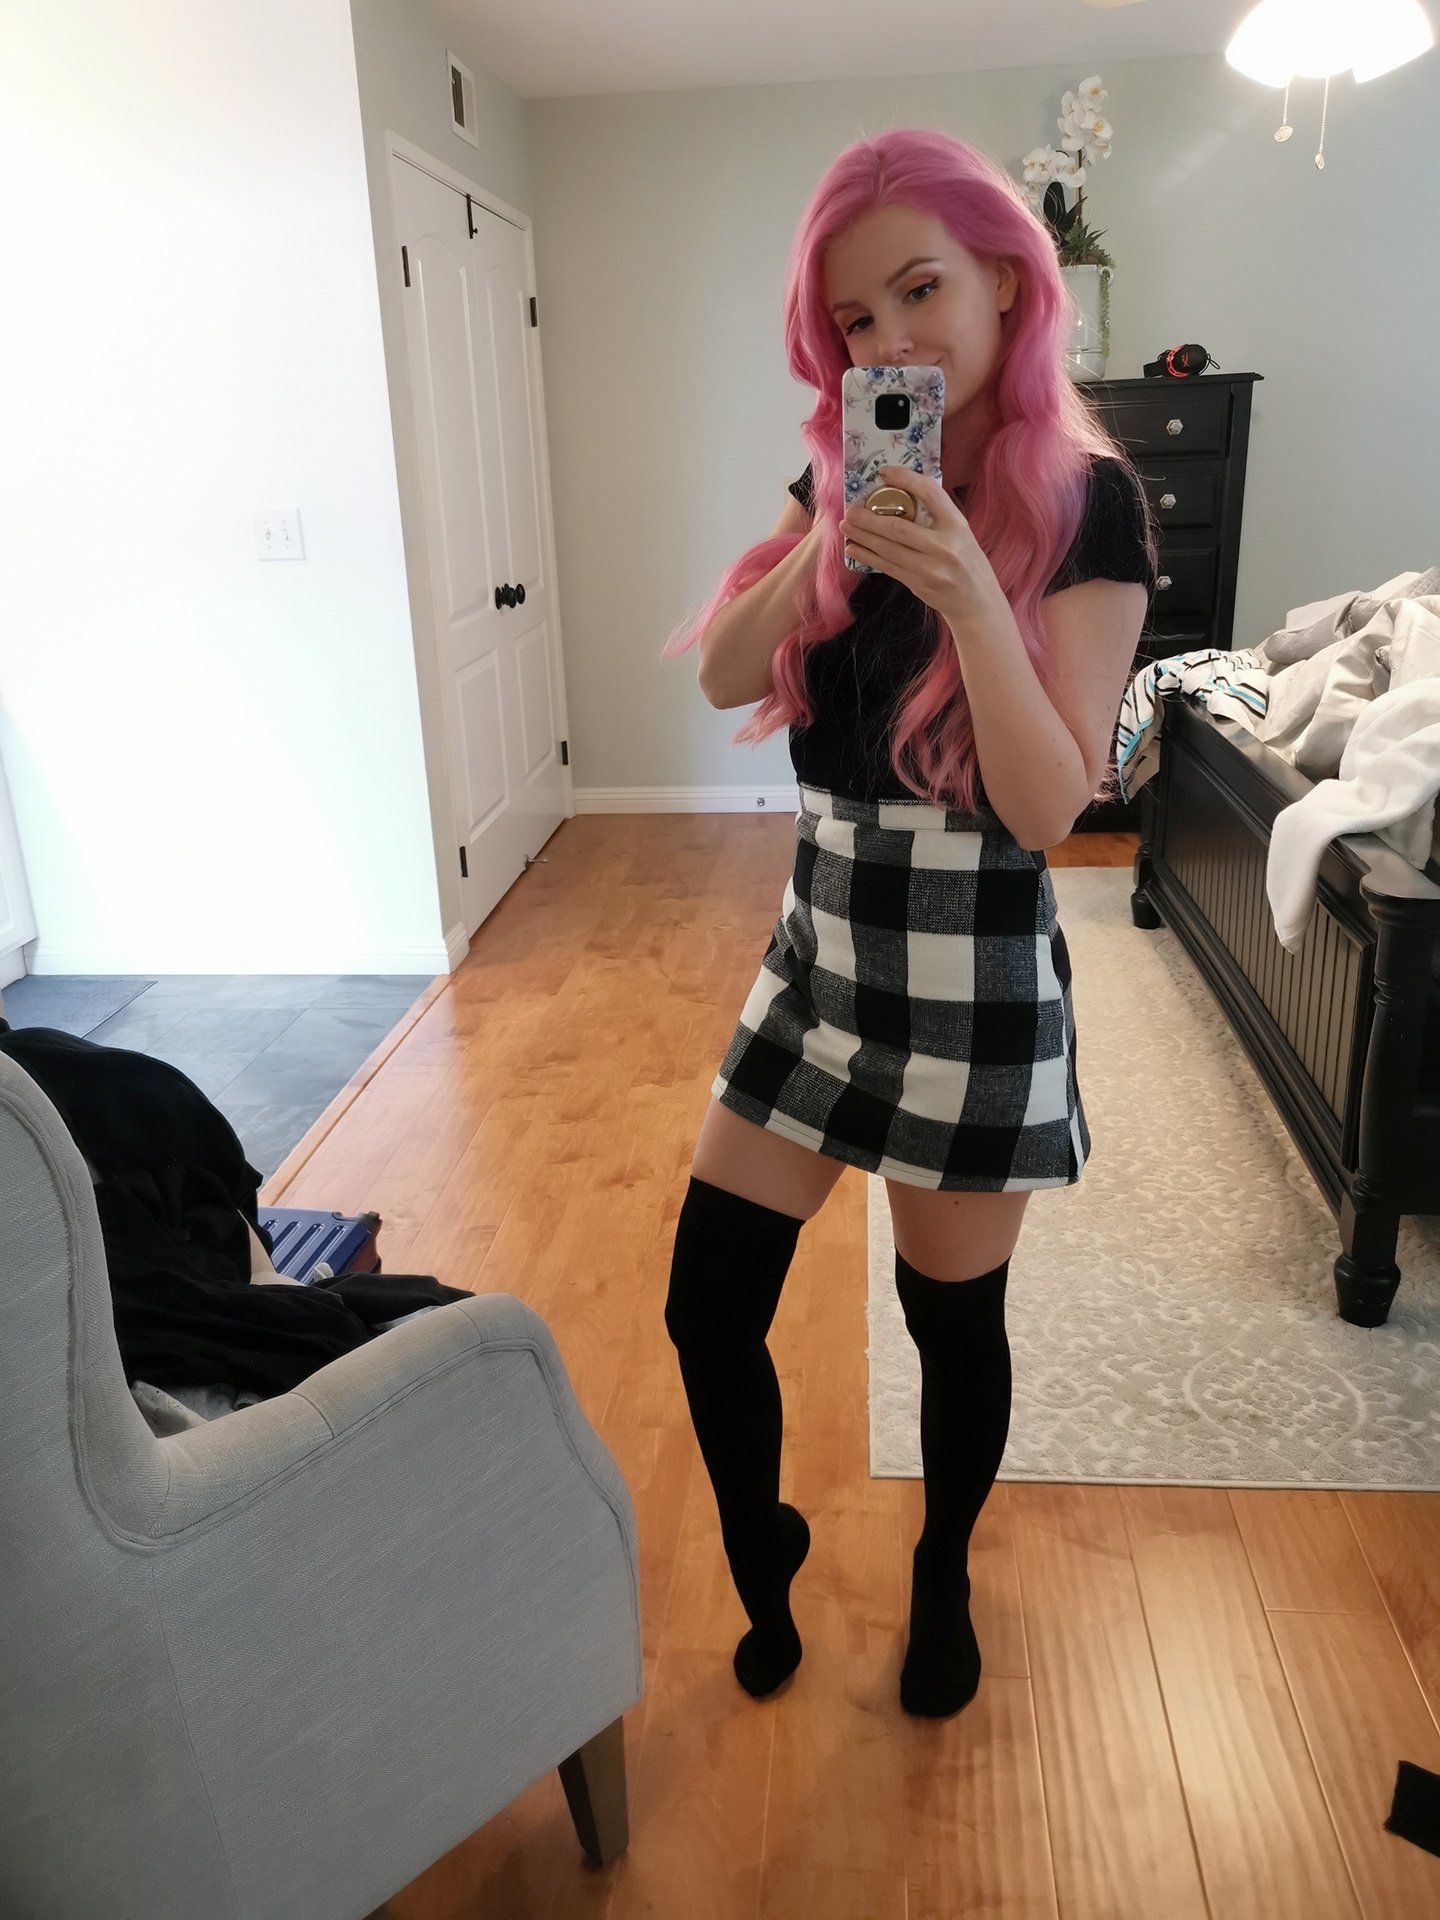 wearing skirts only｜TikTok Search